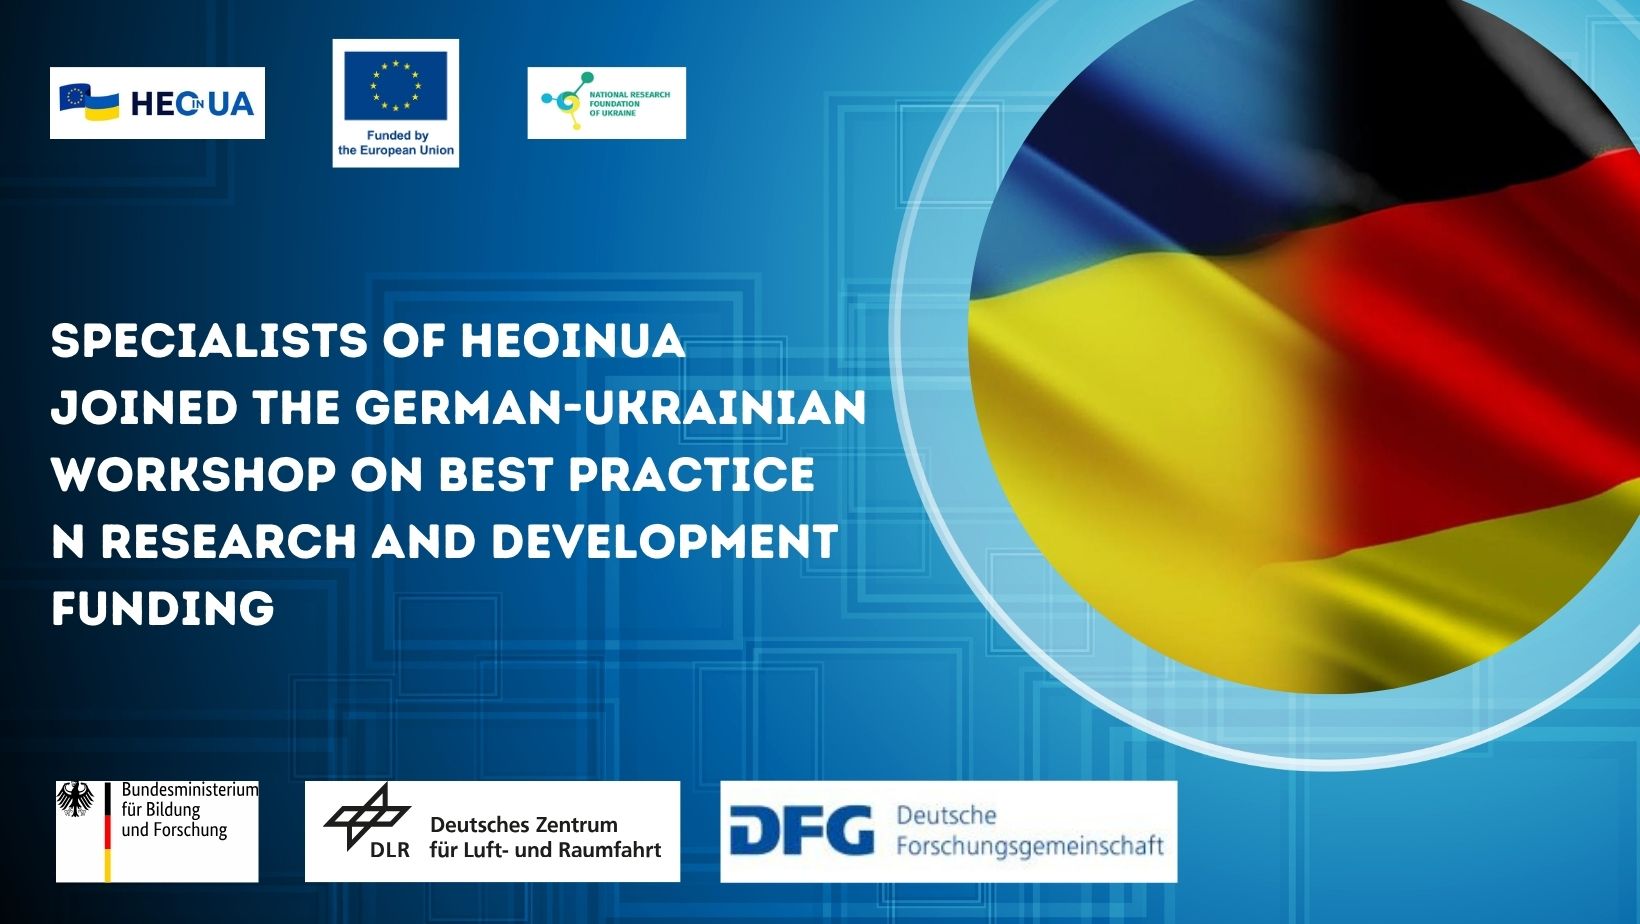 Specialists of HEOinUA joined the German-Ukrainian Workshop on Best Practice in Research and Development Funding